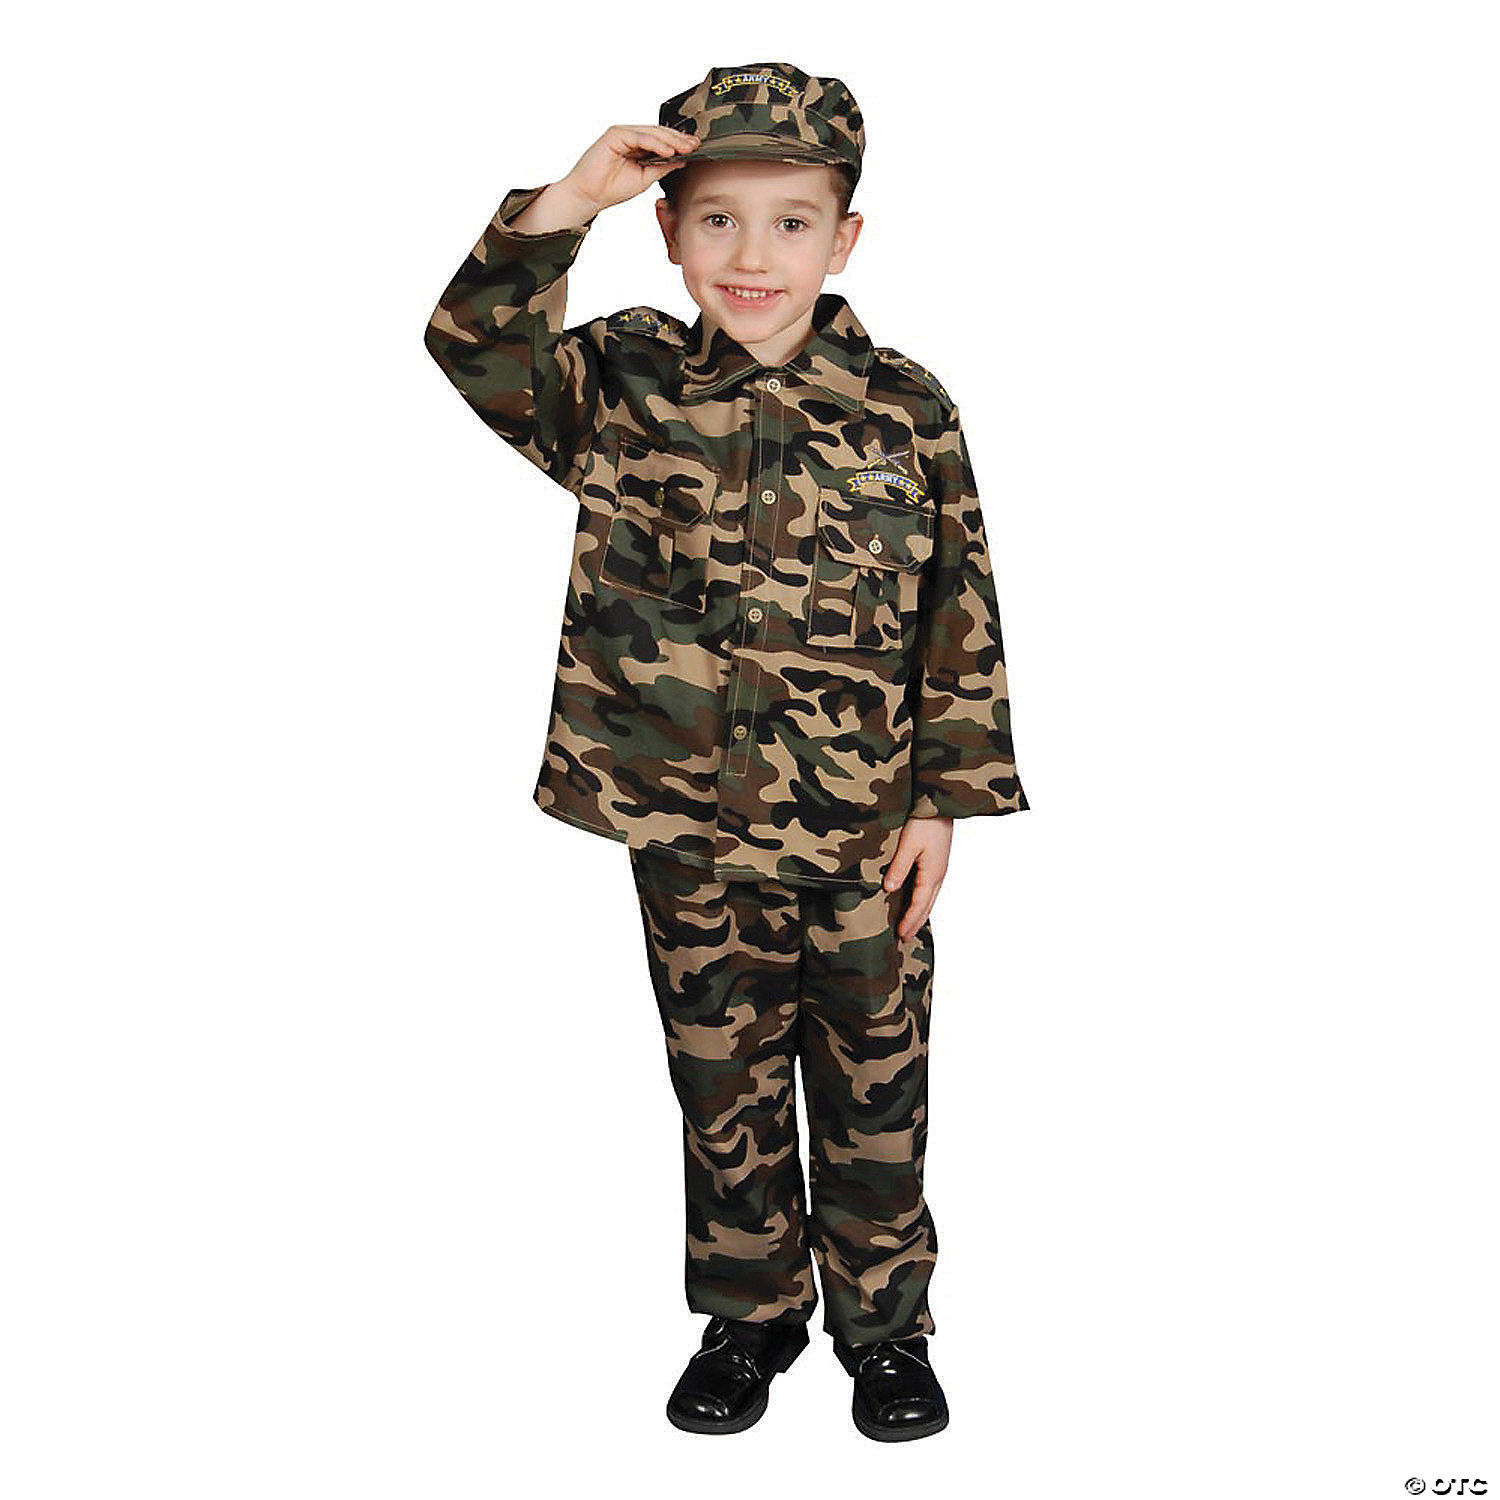 Army Soldier Costume Child Male Small 